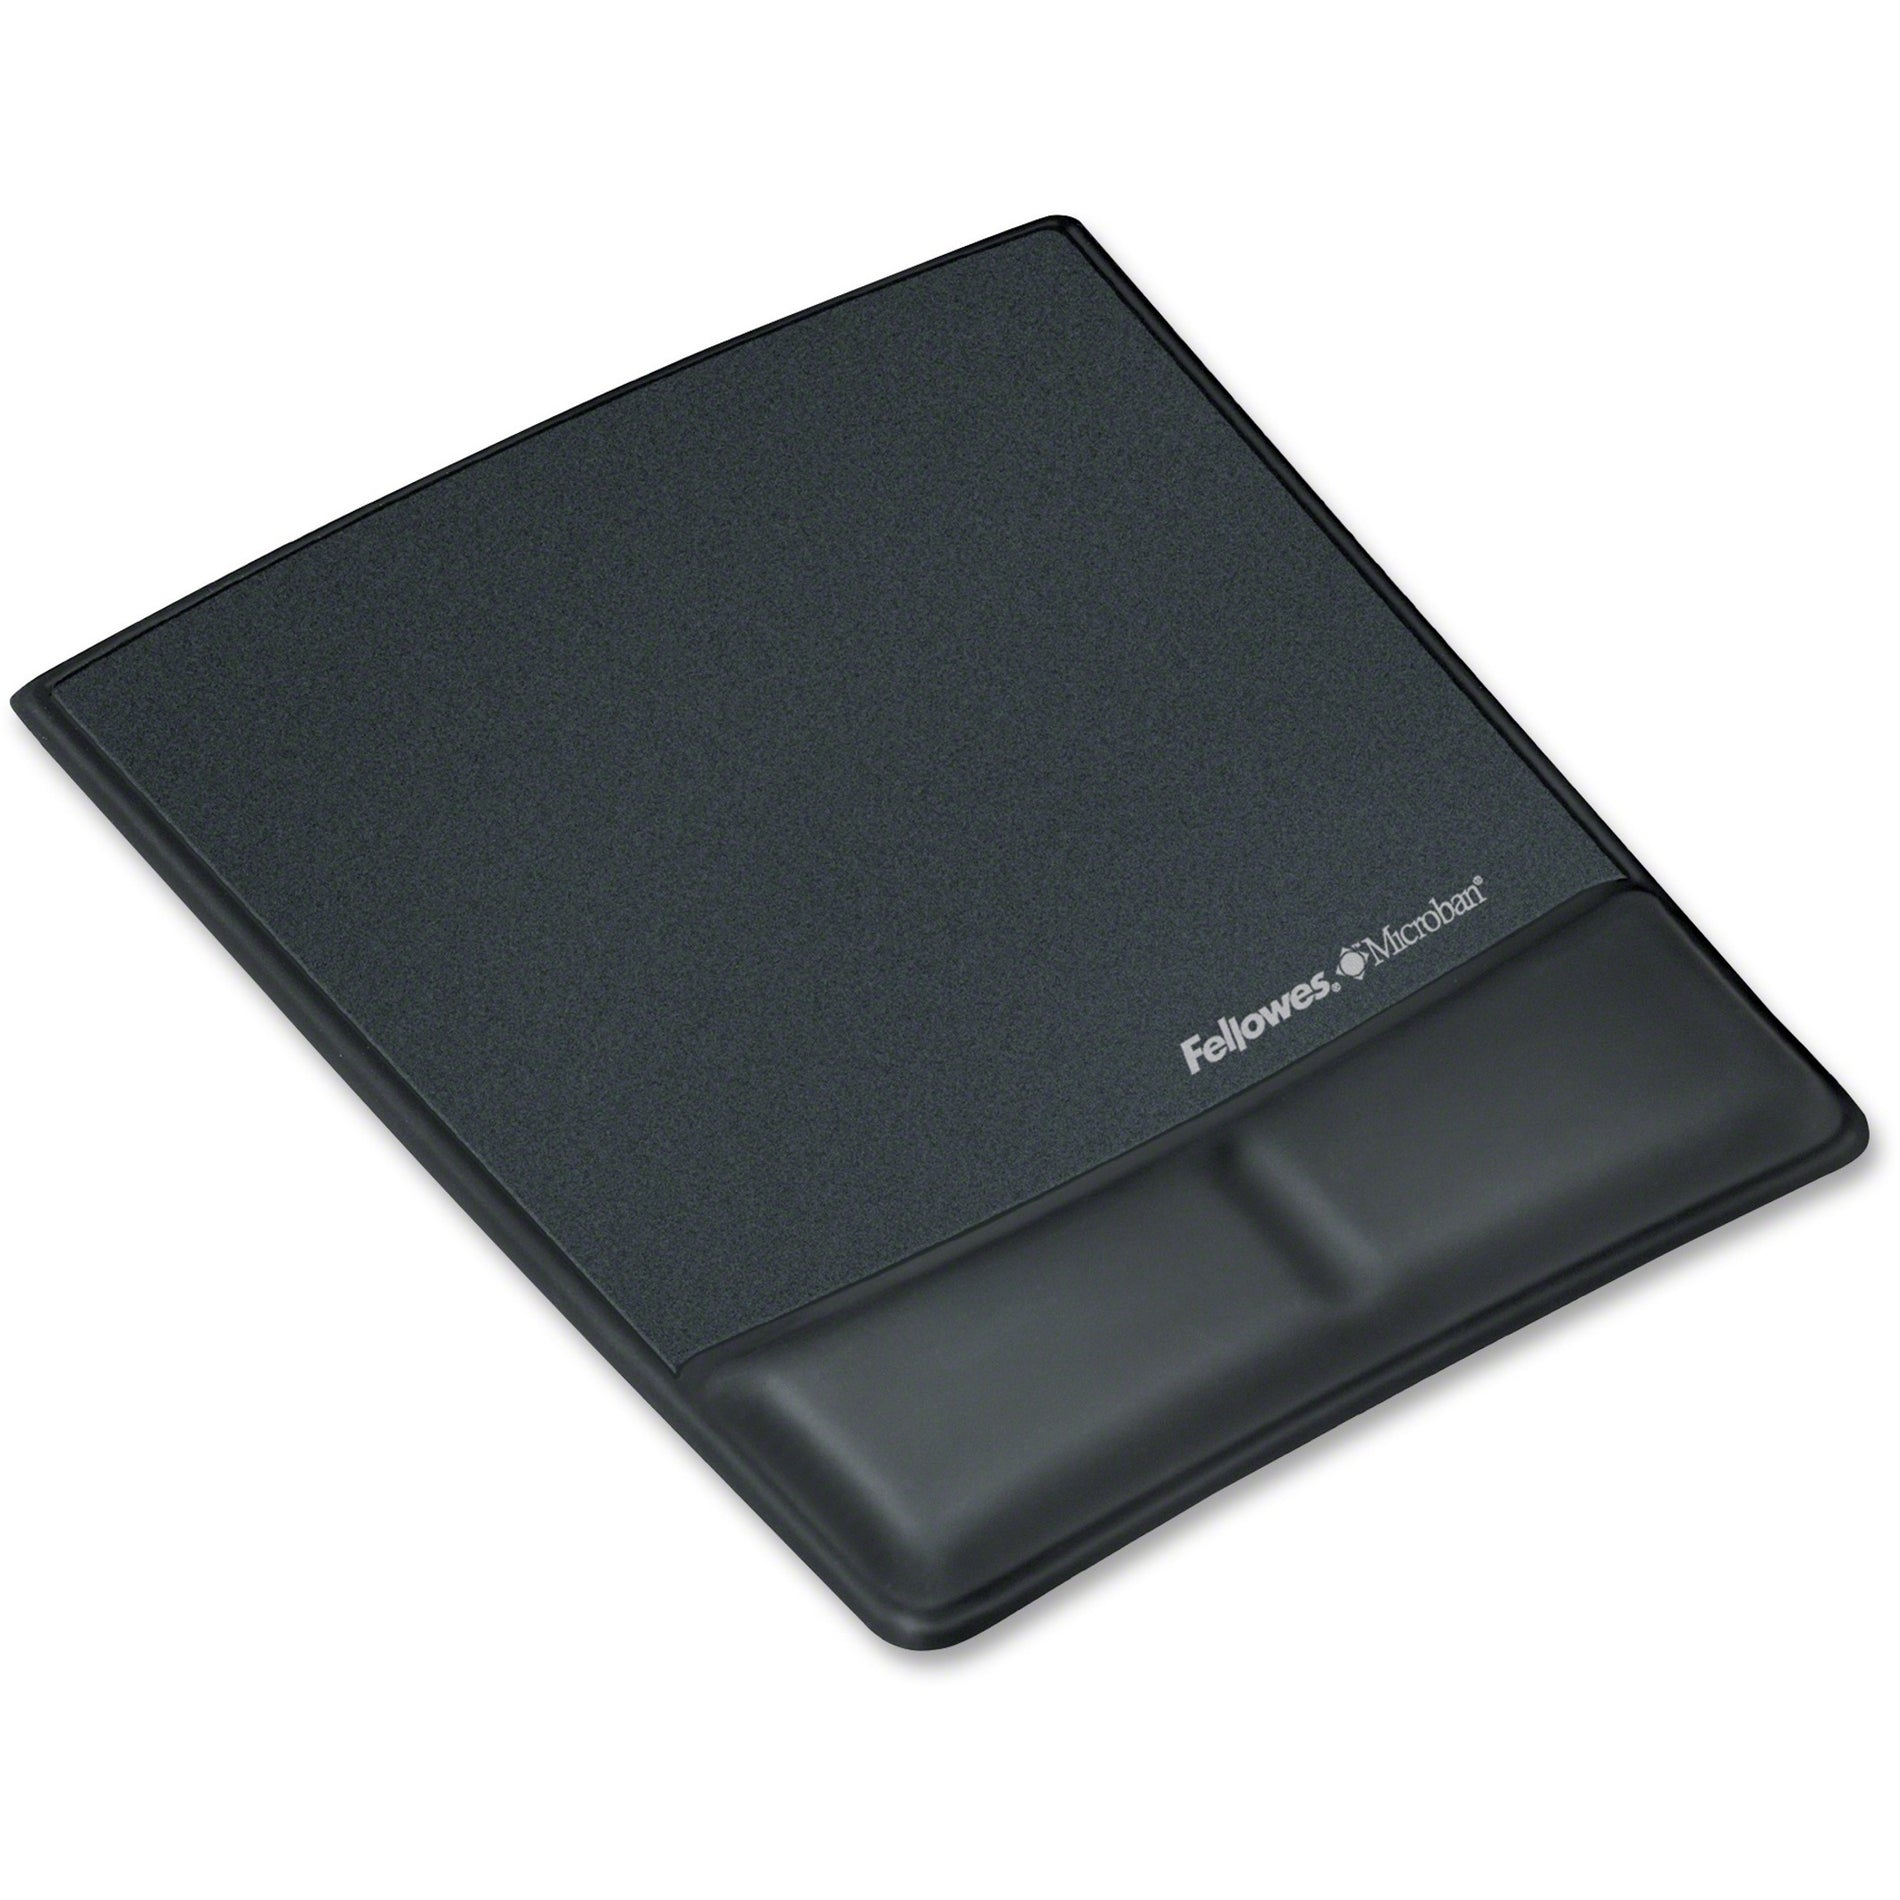 Fellowes 9180901 Mouse Pad / Wrist Support with Microban&reg; Protection, Leatherette, Black, Ergonomic, Pressure Reliever